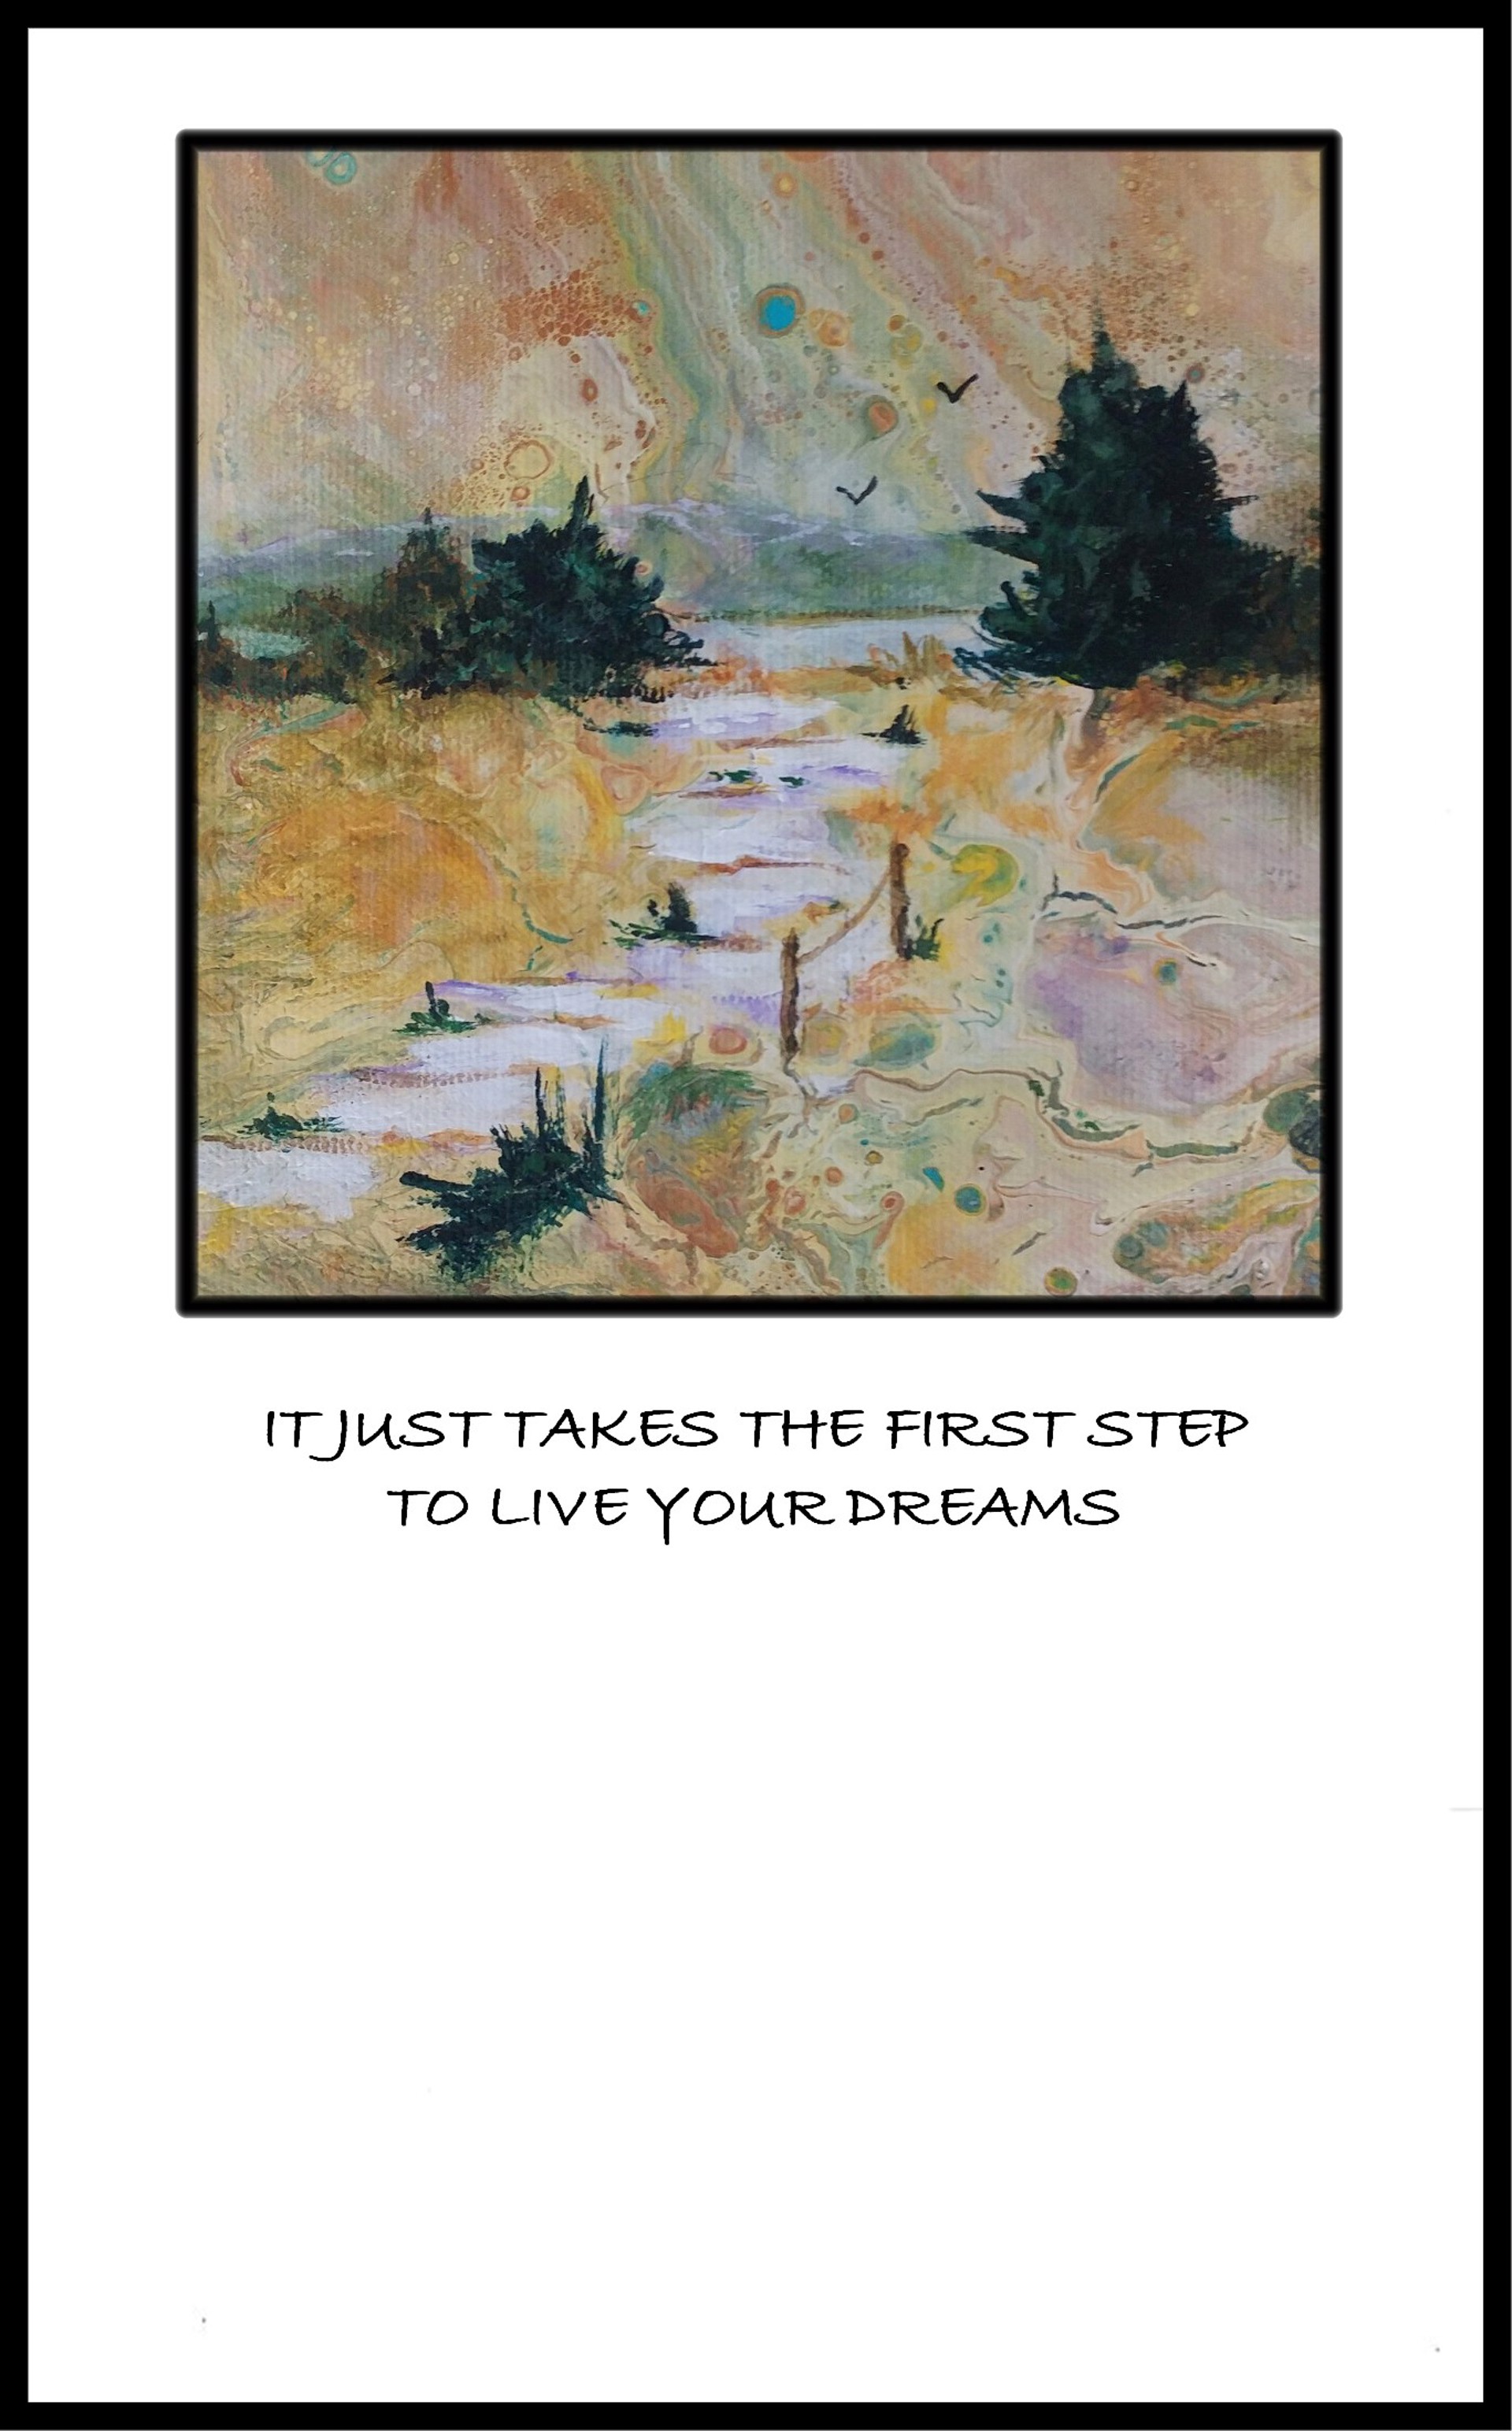 'IT JUST TAKES THE FIRST STEP TO LIVE YOUR DREAMS' by Charleen Martin